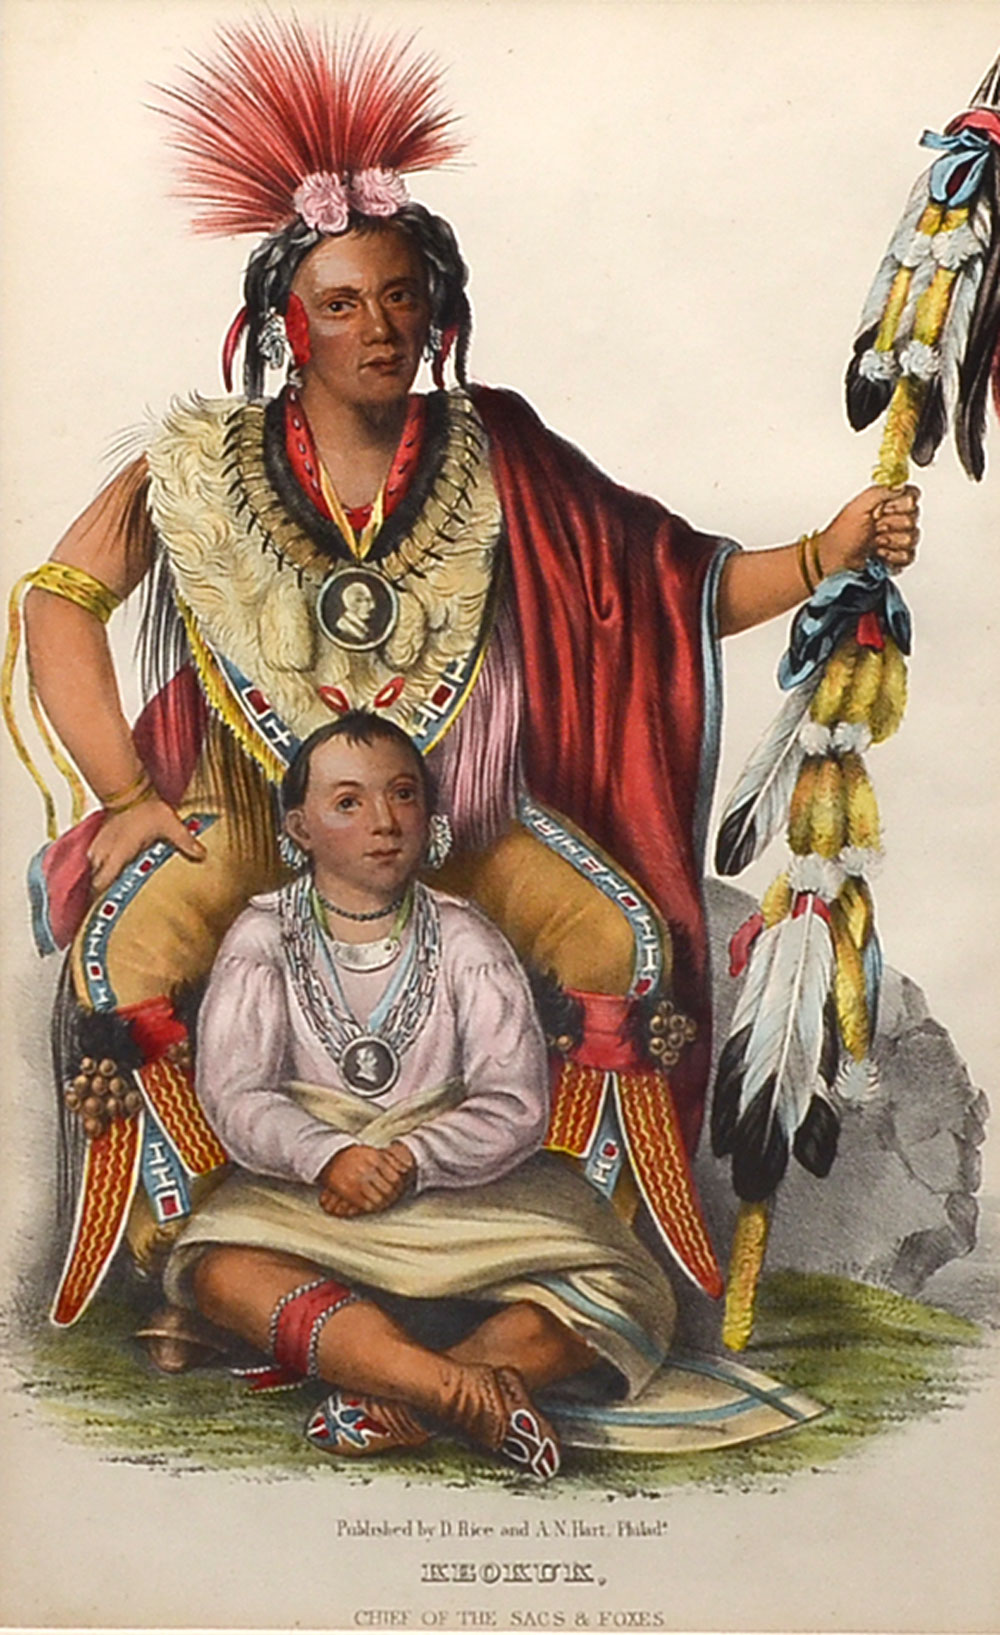 MCKENNEY AND HALL INDIAN LITHOGRAPH: